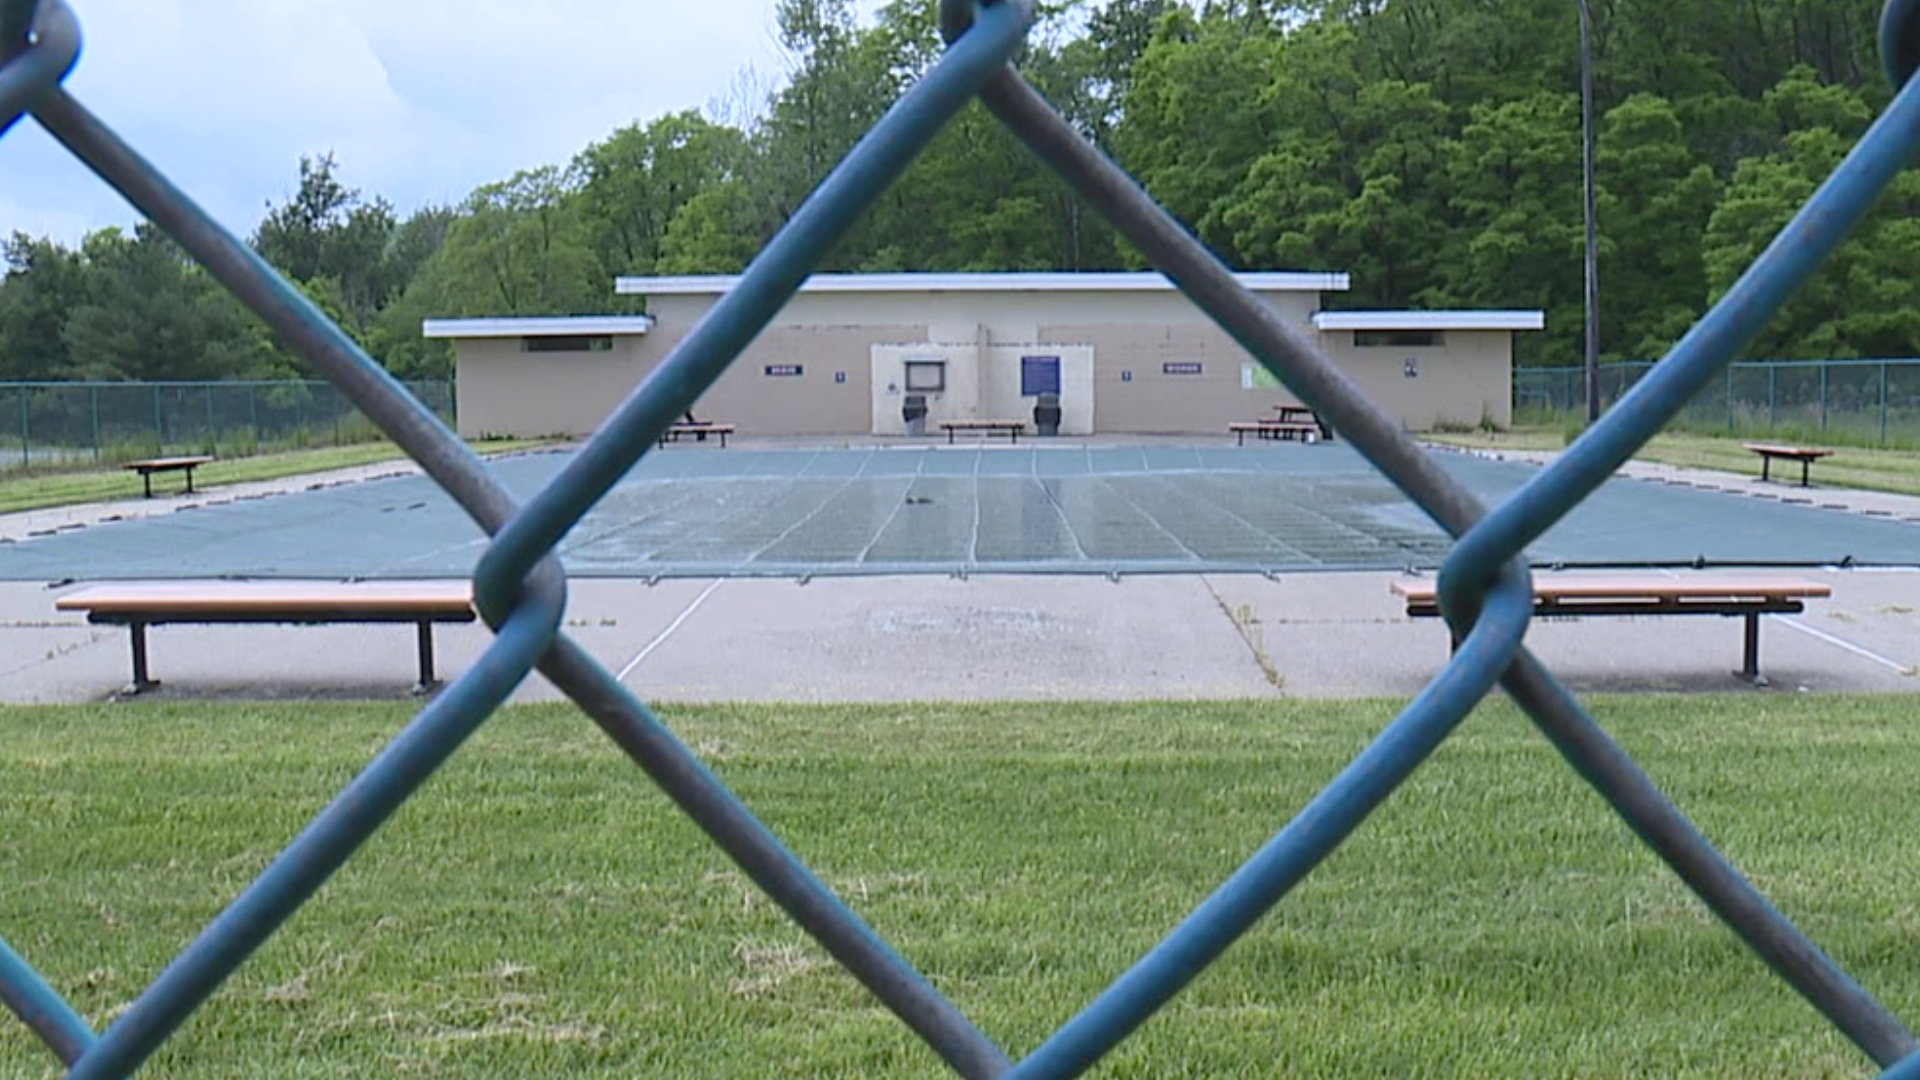 Newswatch 16 told you in March that the Nay Aug pool complex would remain closed for the season, now comes word that another pool will stay closed for the summer.